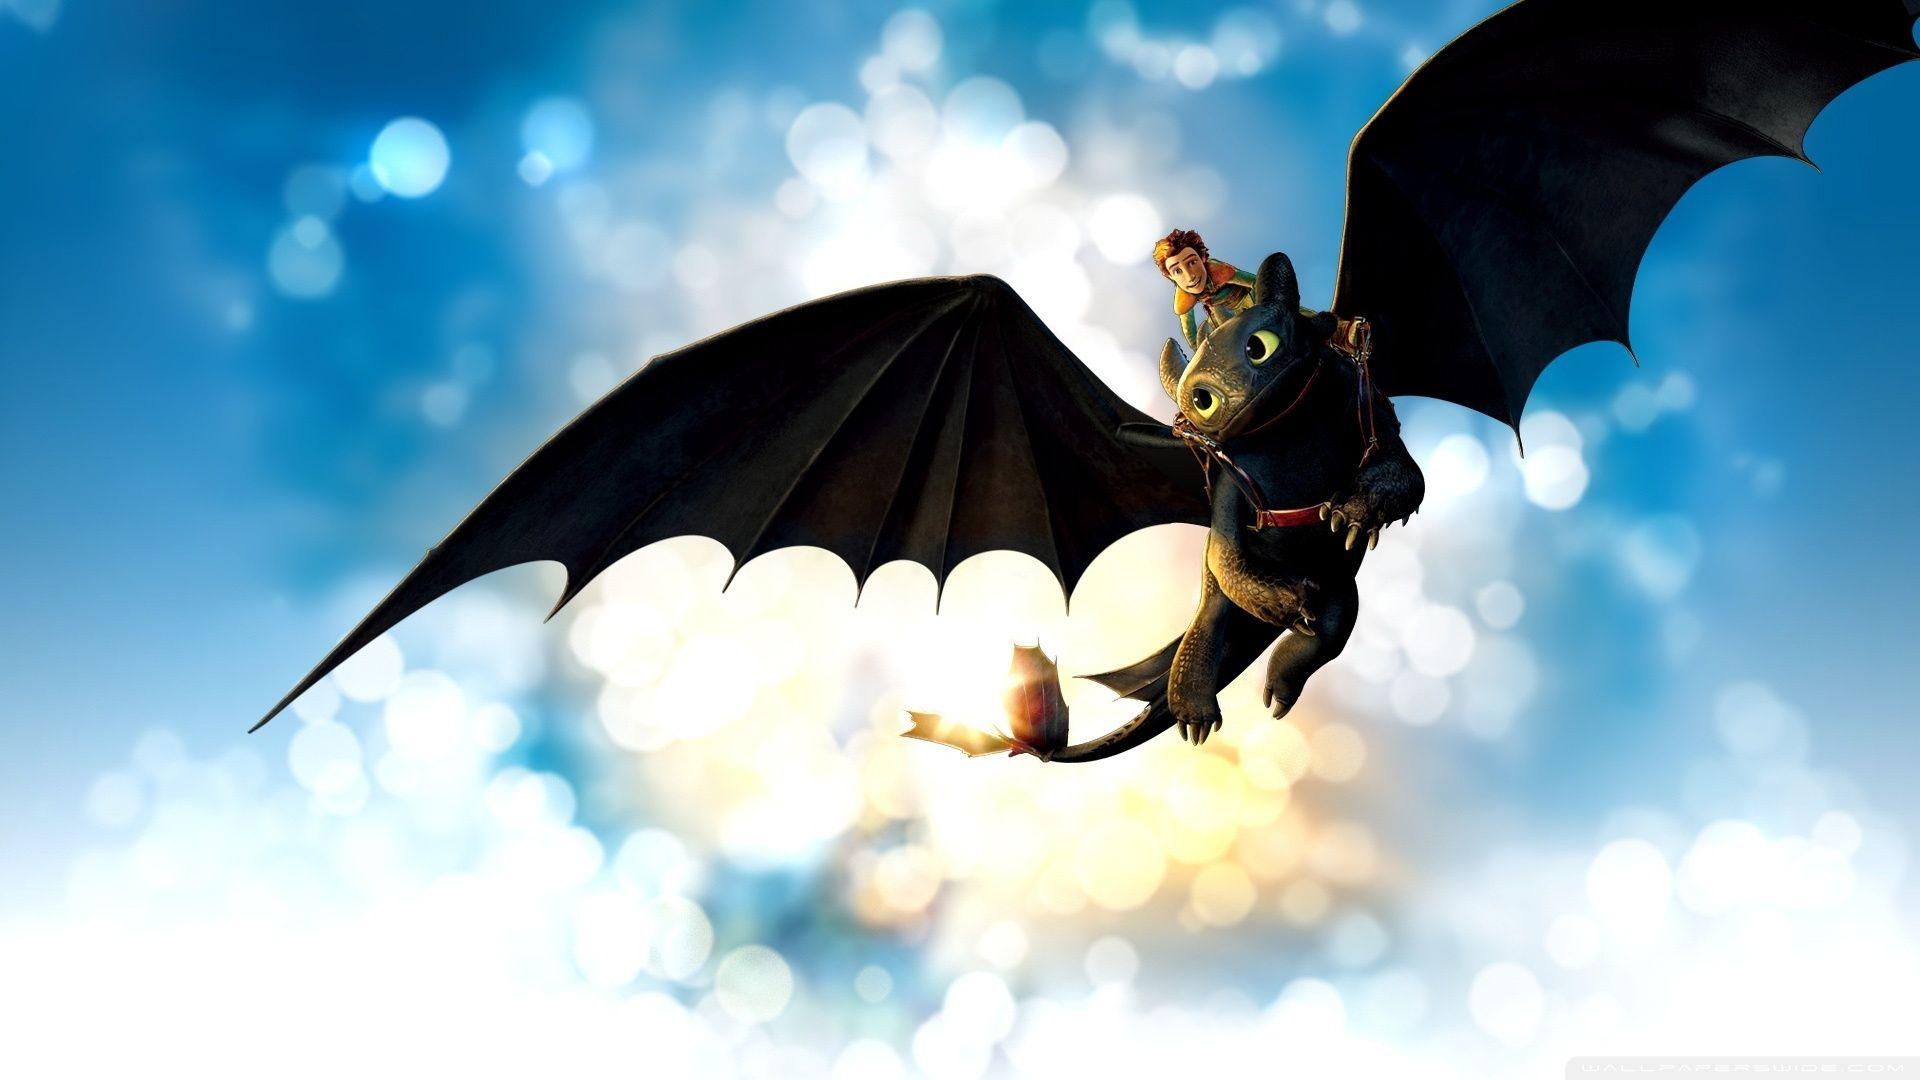 How To Train Your Dragon Wallpaper Free How To Train Your Dragon Background